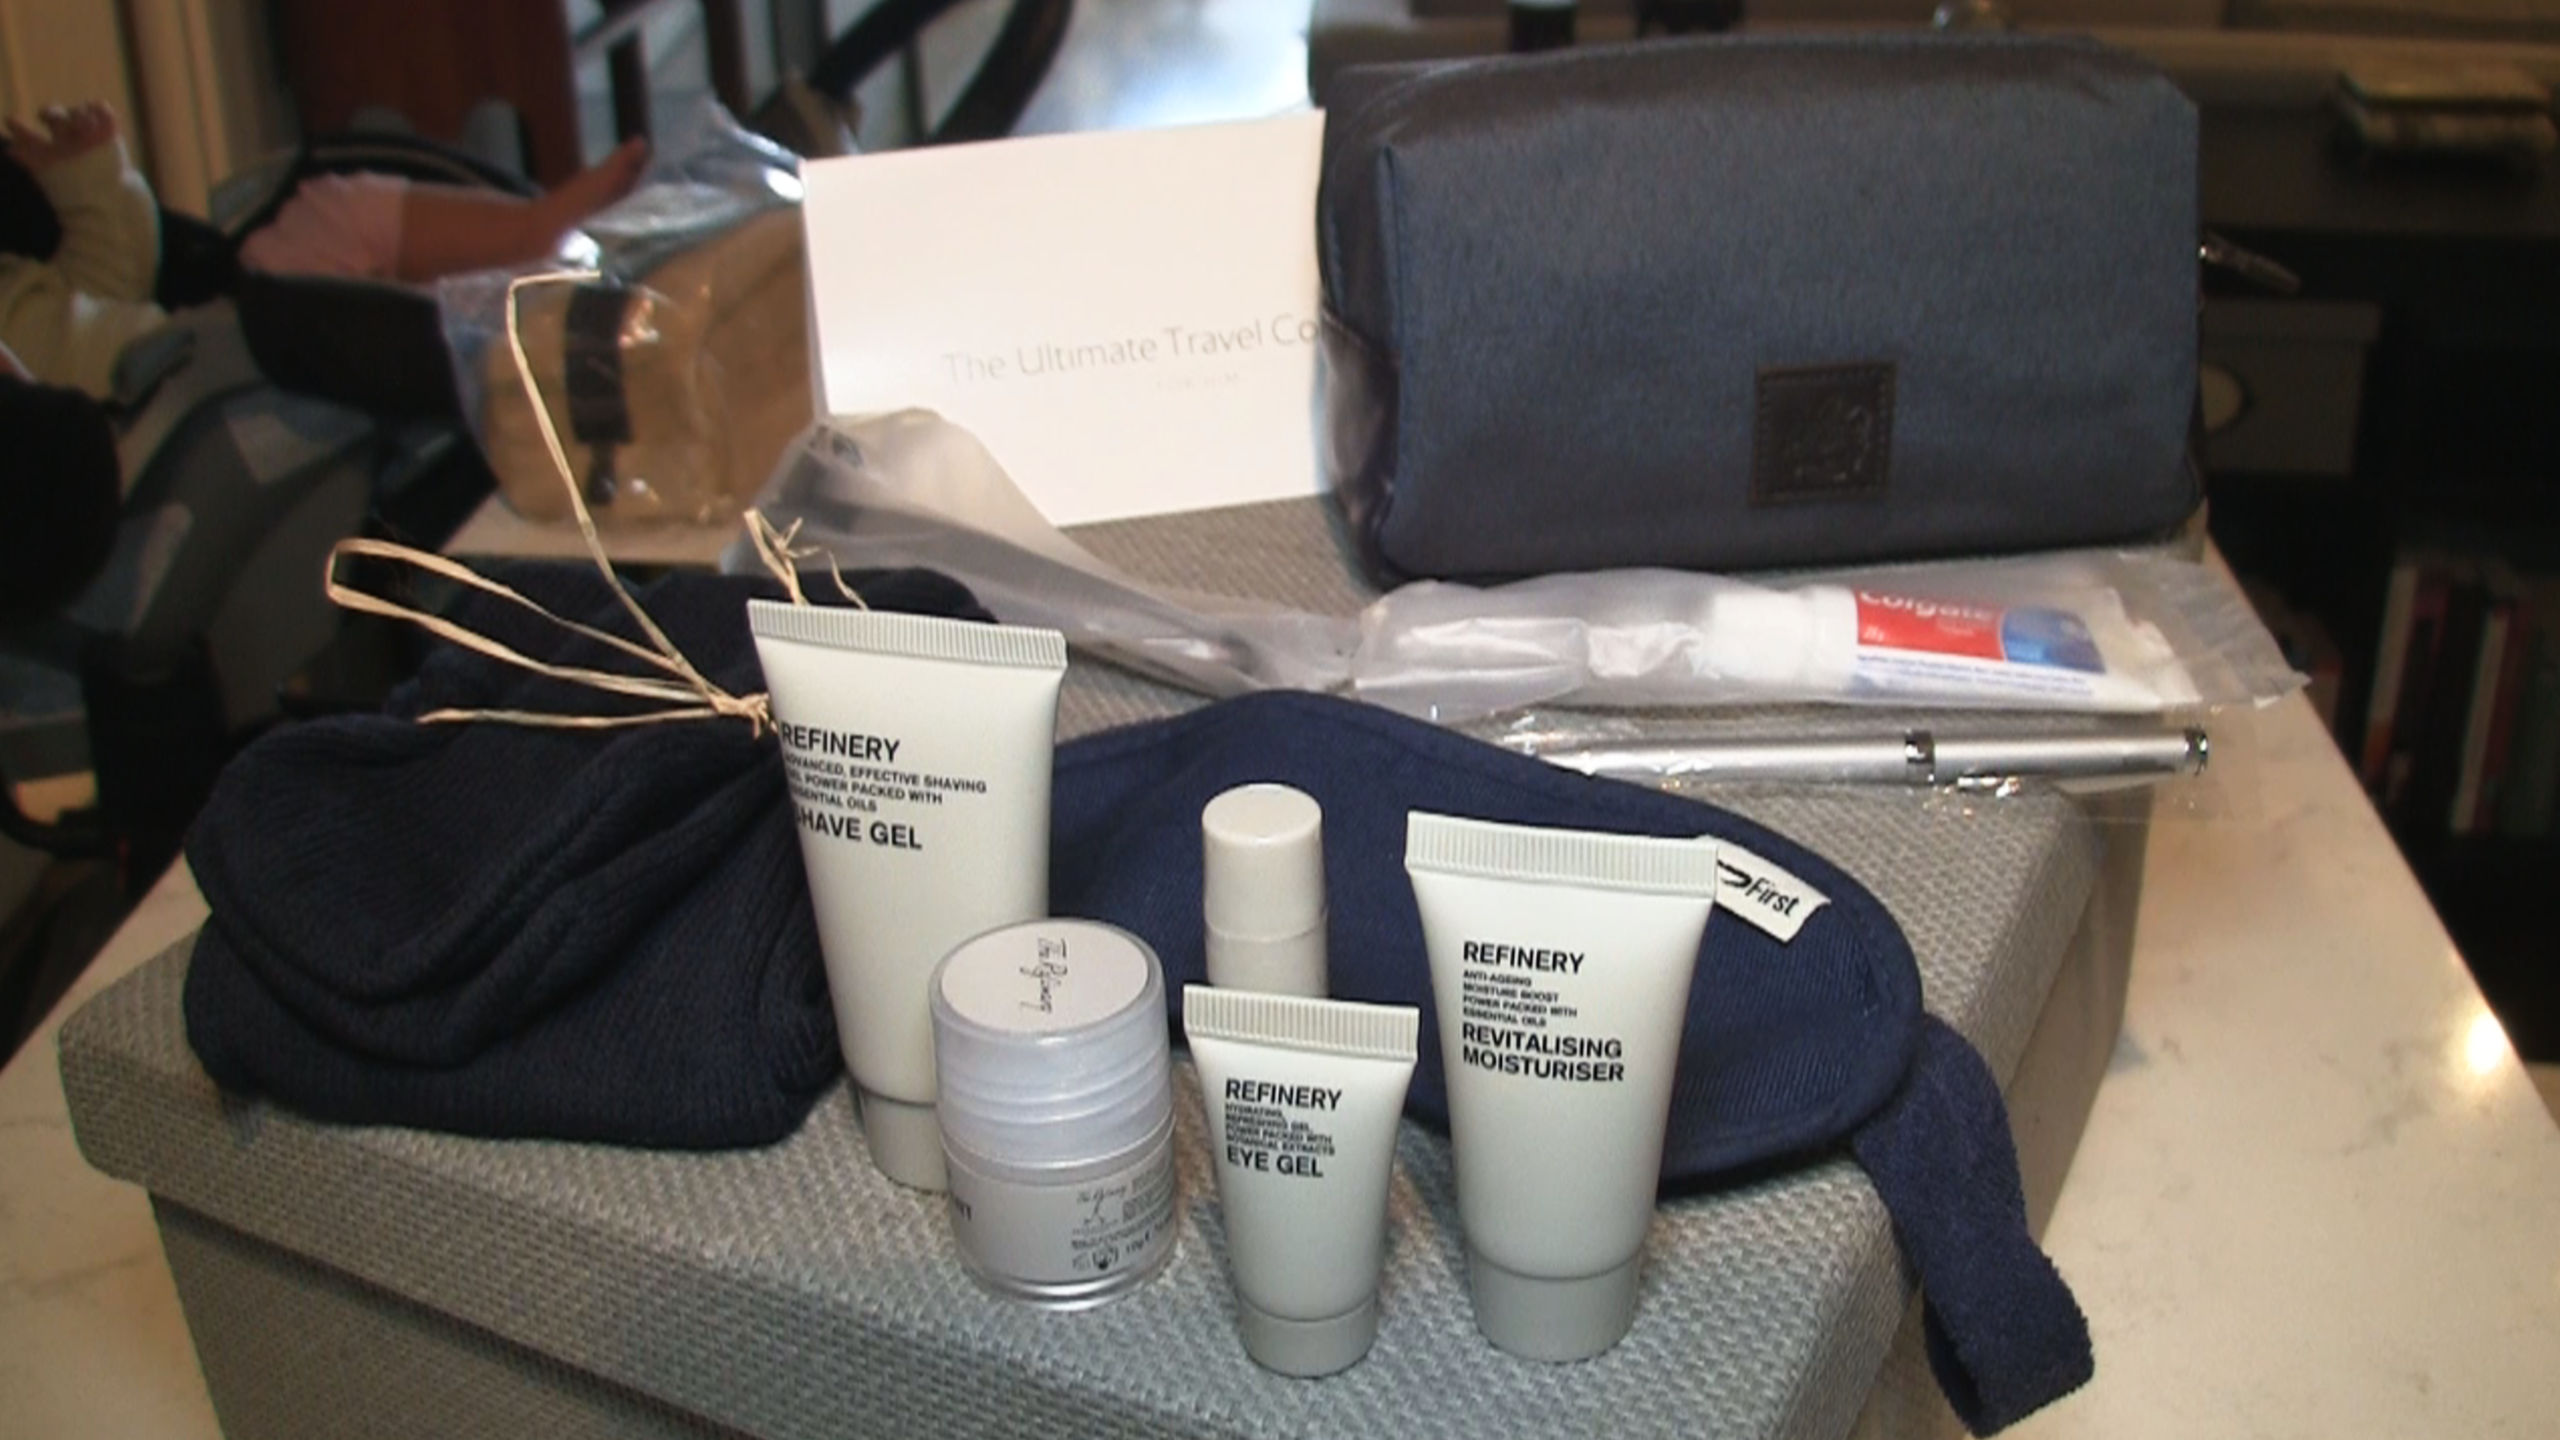 British Airways First Class Amenity Kit contents.